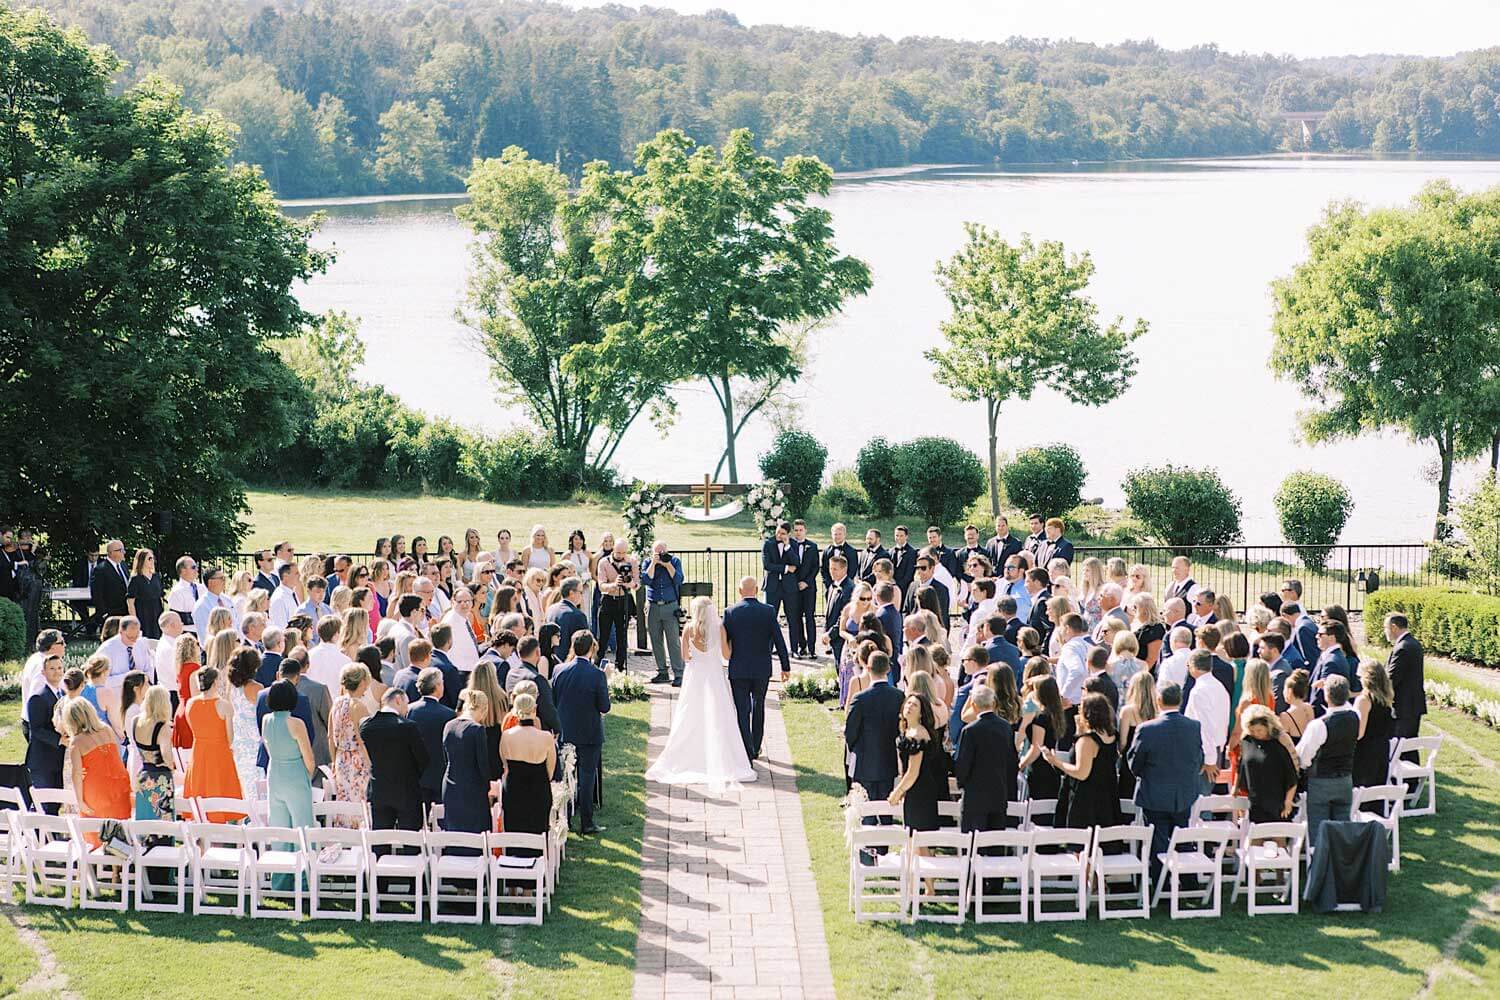 A wedding ceremony on a grassy lawn with a lake in the background.